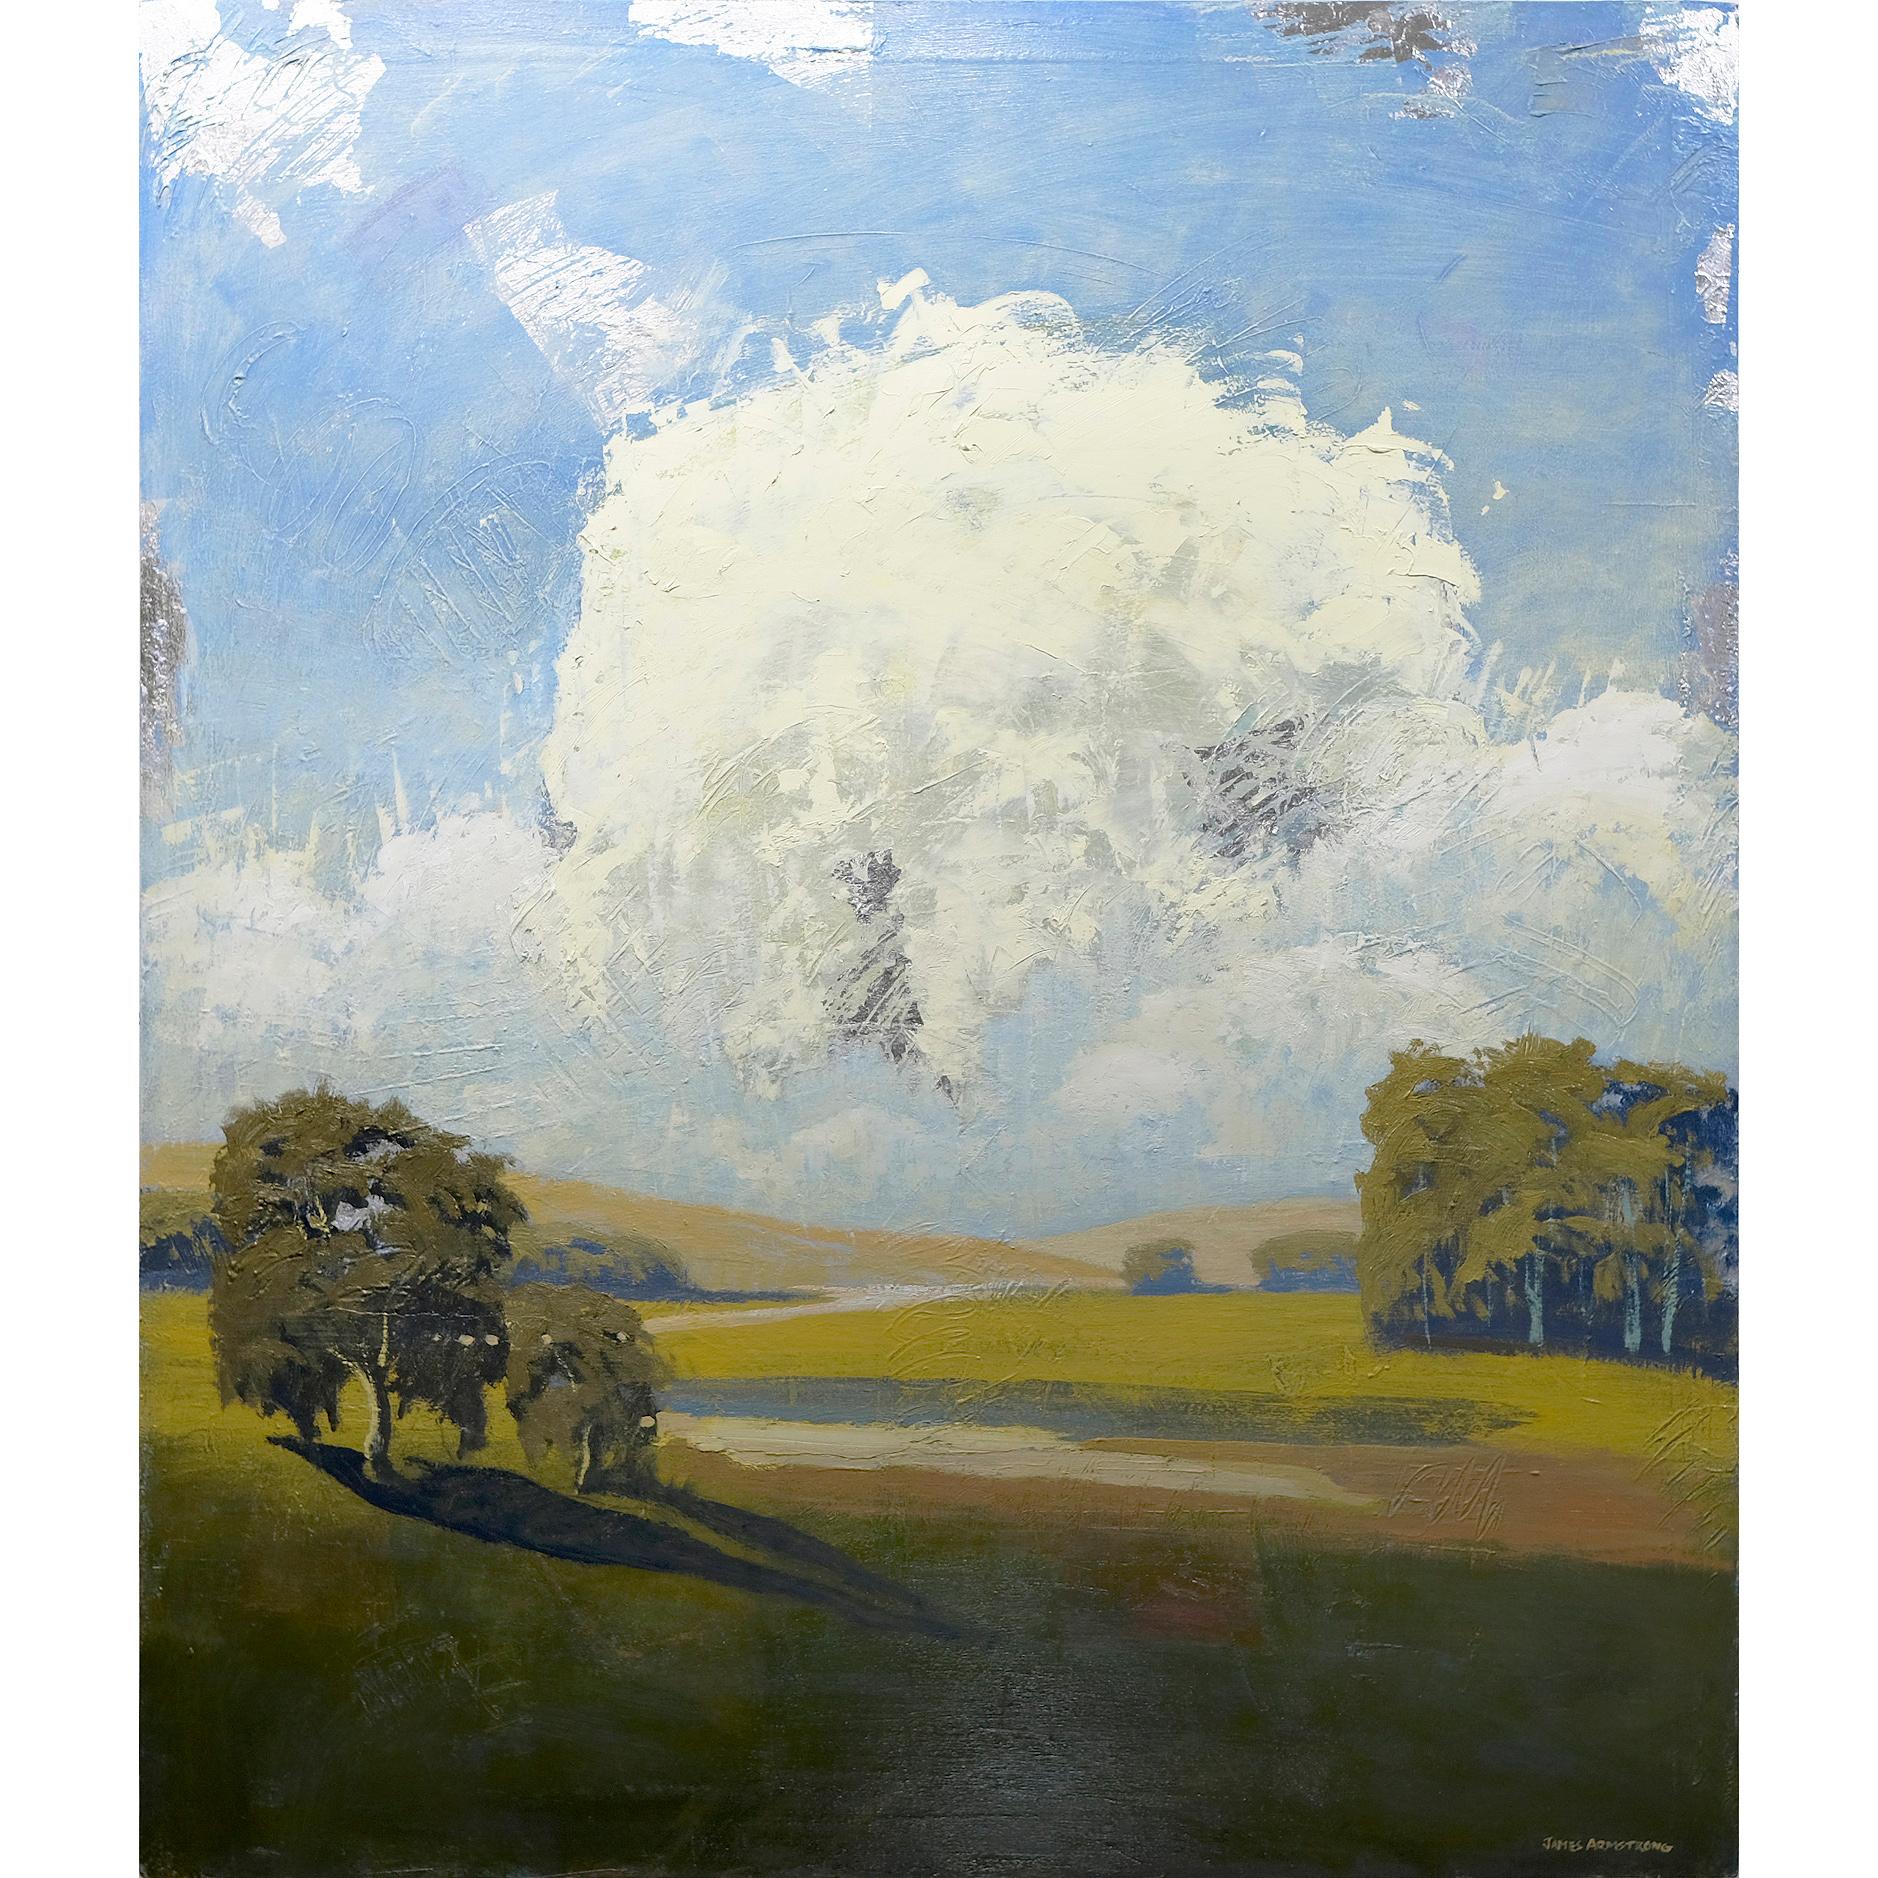 James Armstrong Landscape Painting - Clouds Like Cotton 